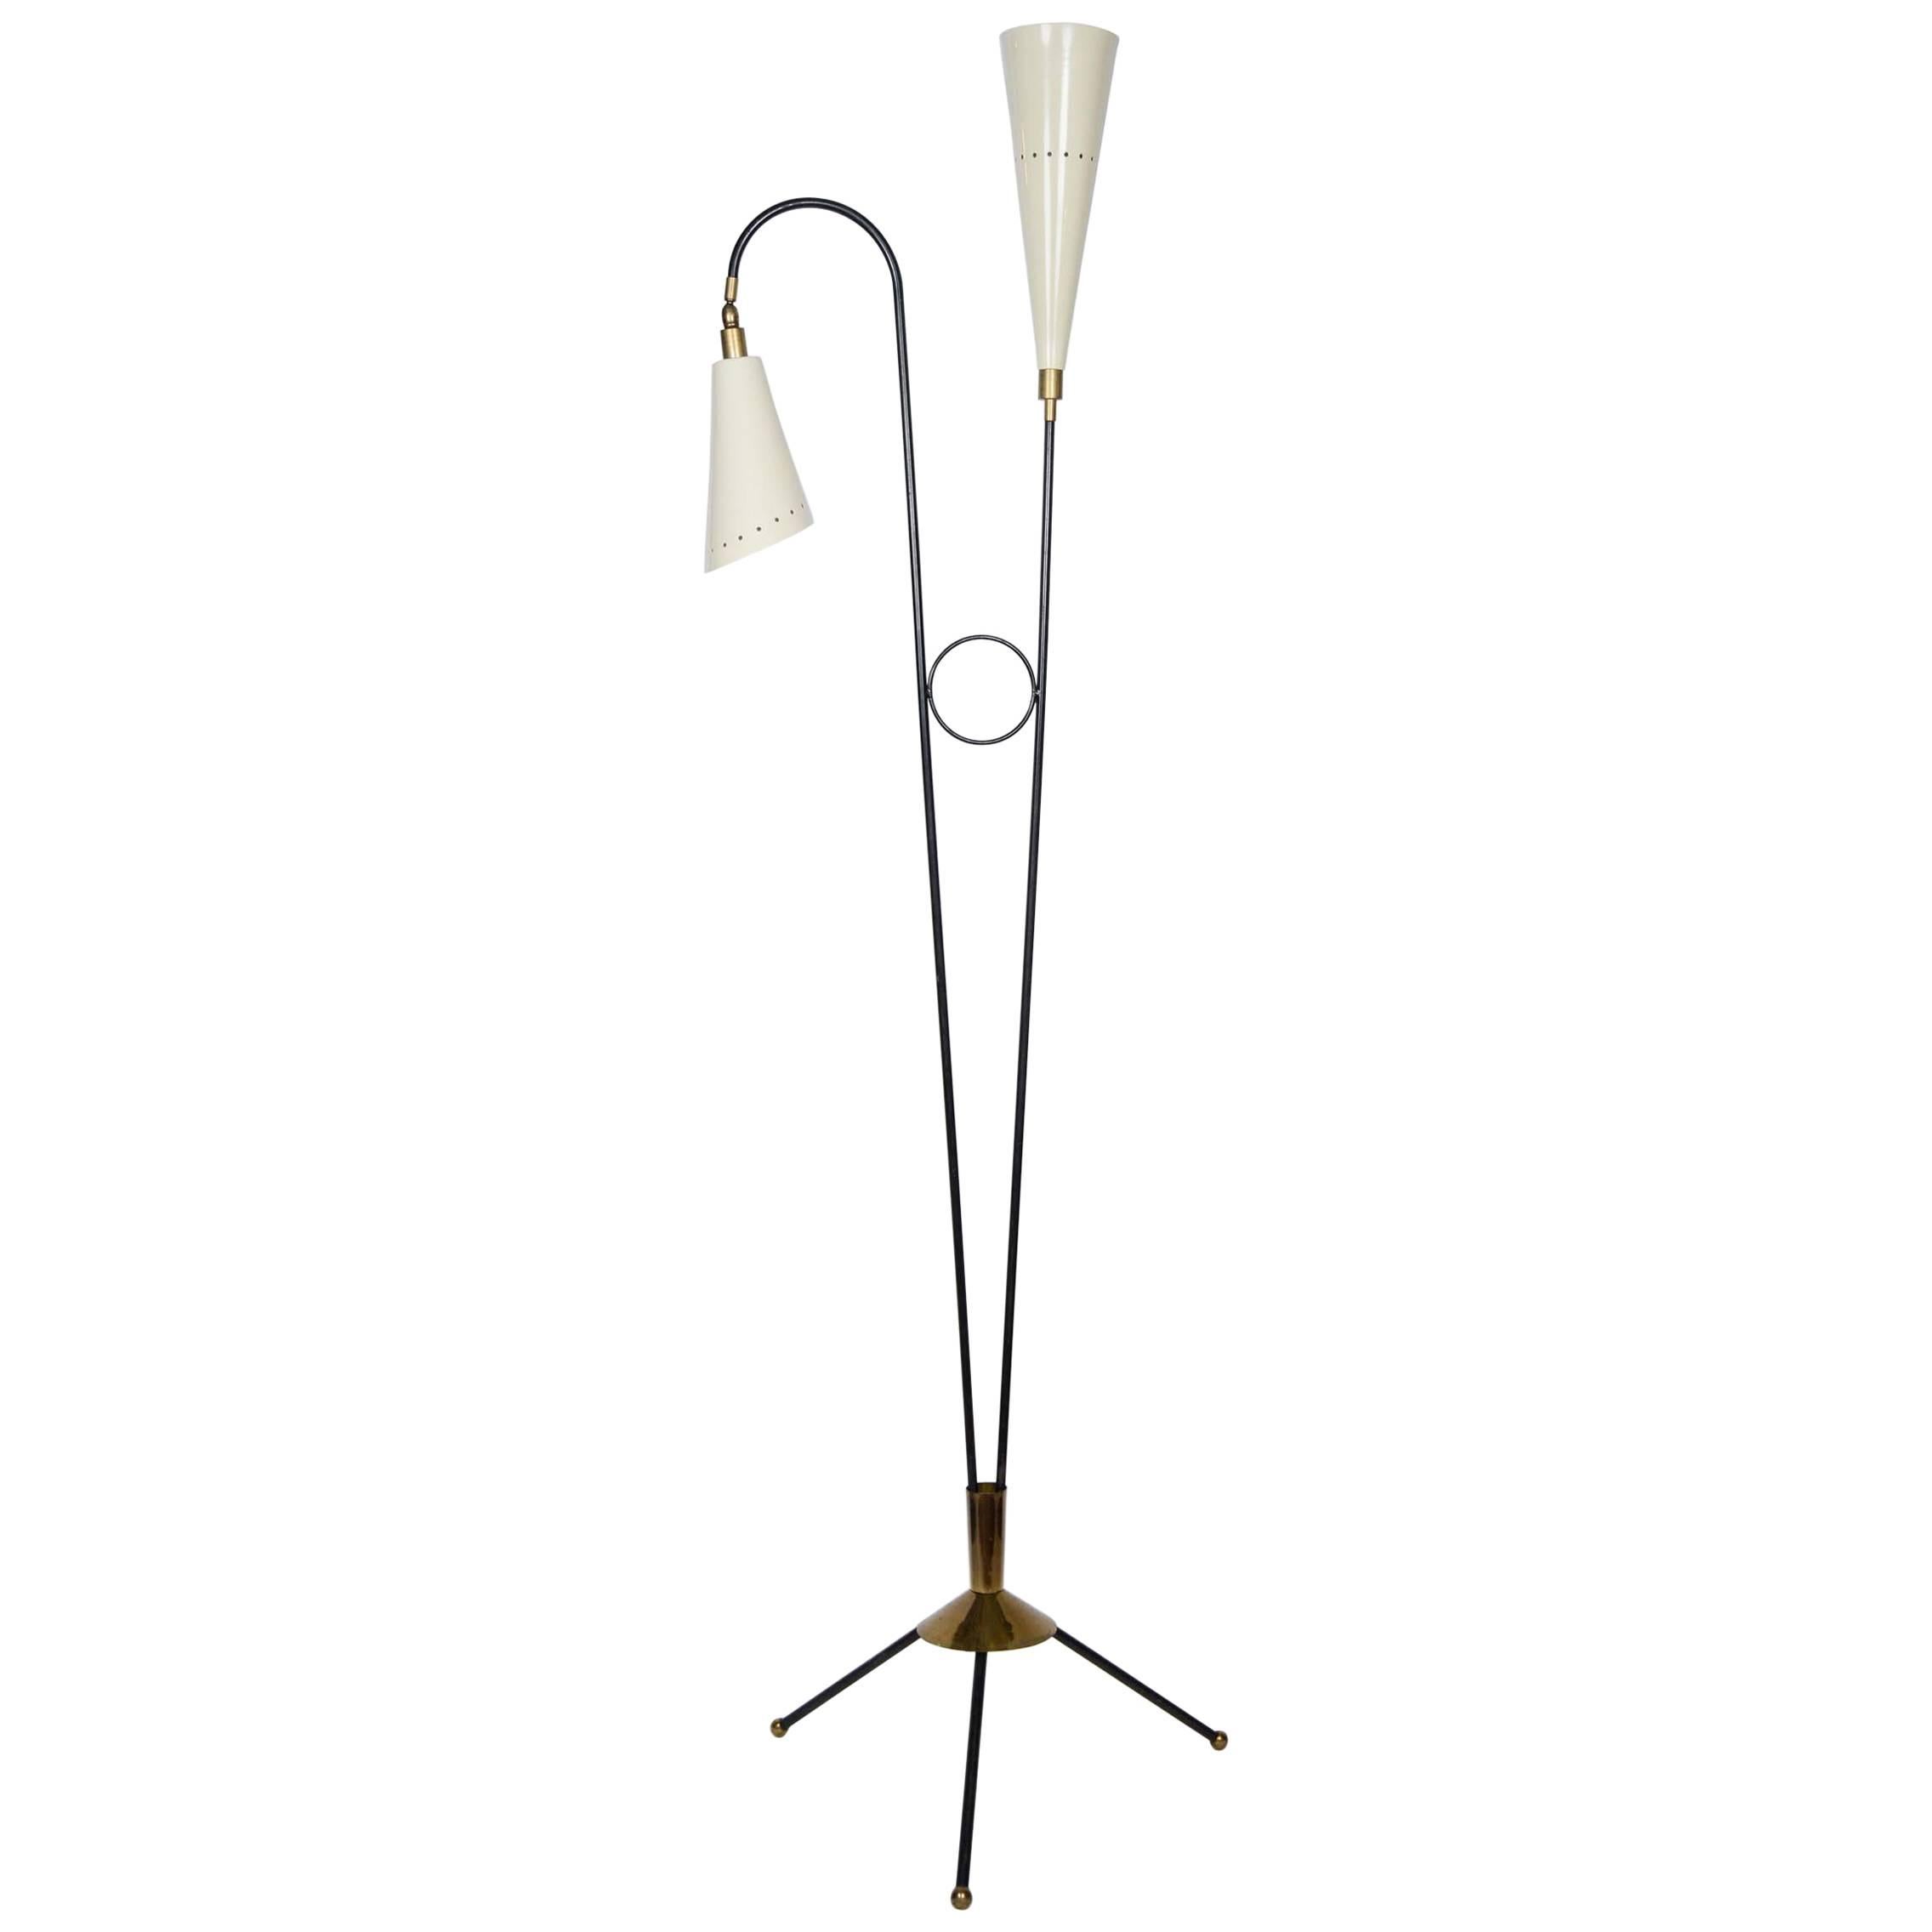 Rare Two Arms Floor Lamp attributed to Stilnovo, circa 1960s